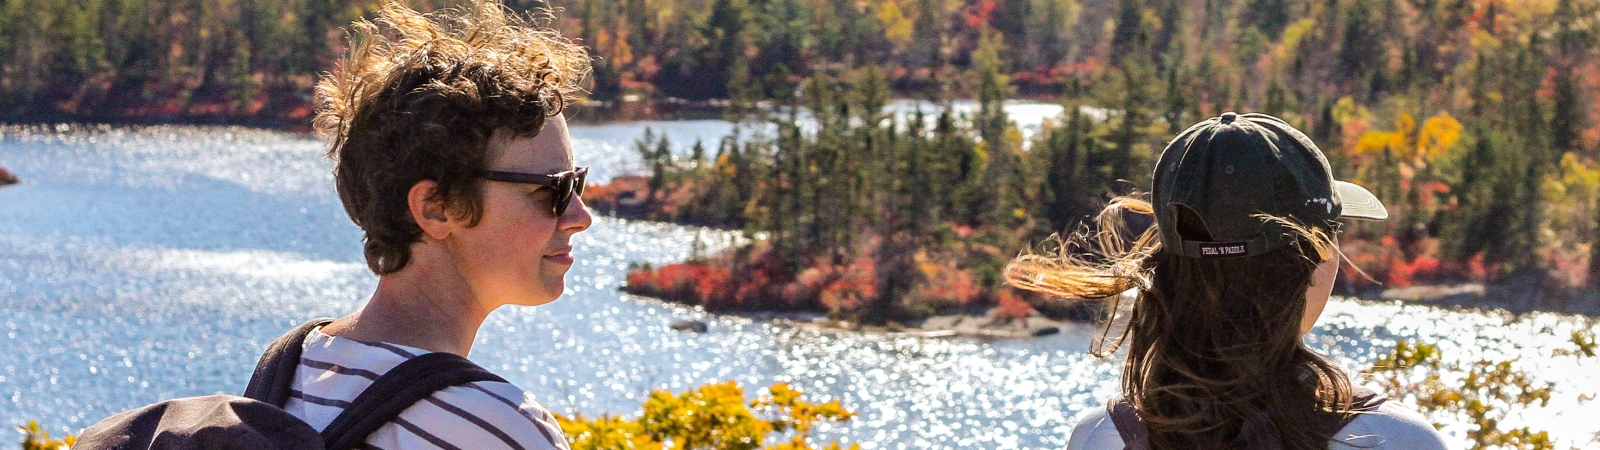 two people wearing backpacks stand at a point overlooking a lake and forest in autumn